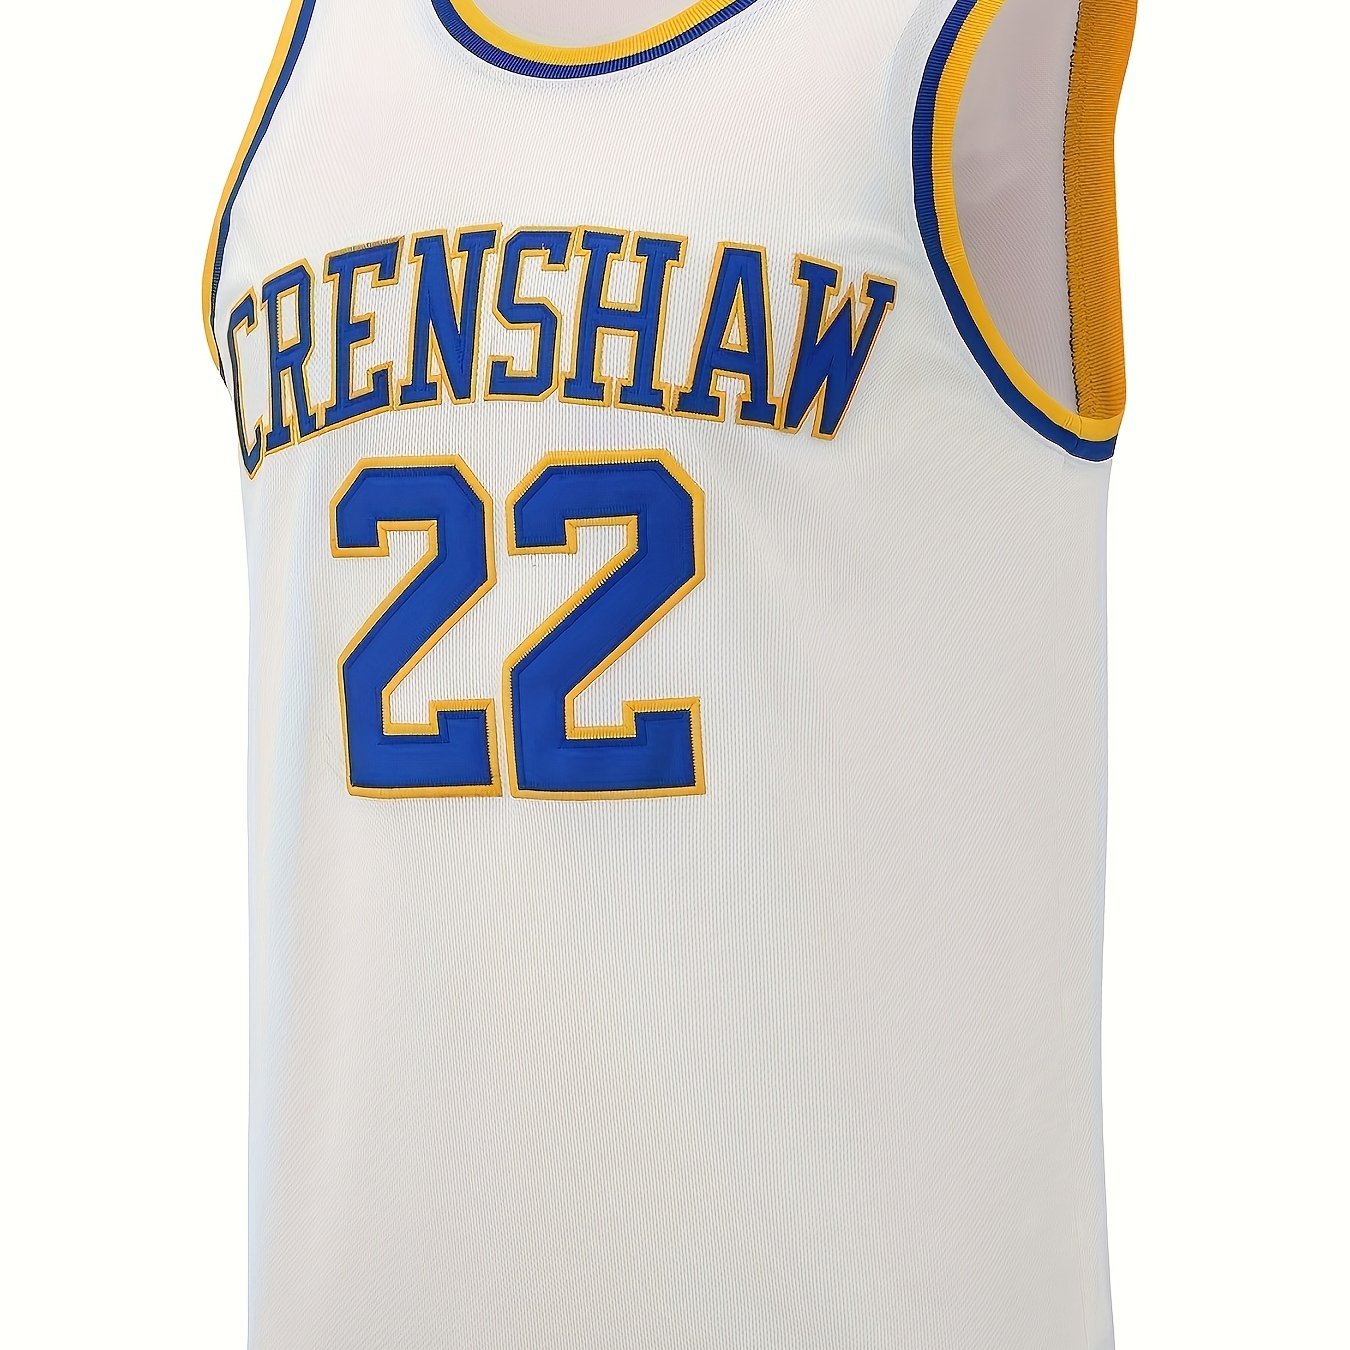 Crenshaw High School Love and Basketball Jersey S-XXXL : :  Clothing, Shoes & Accessories